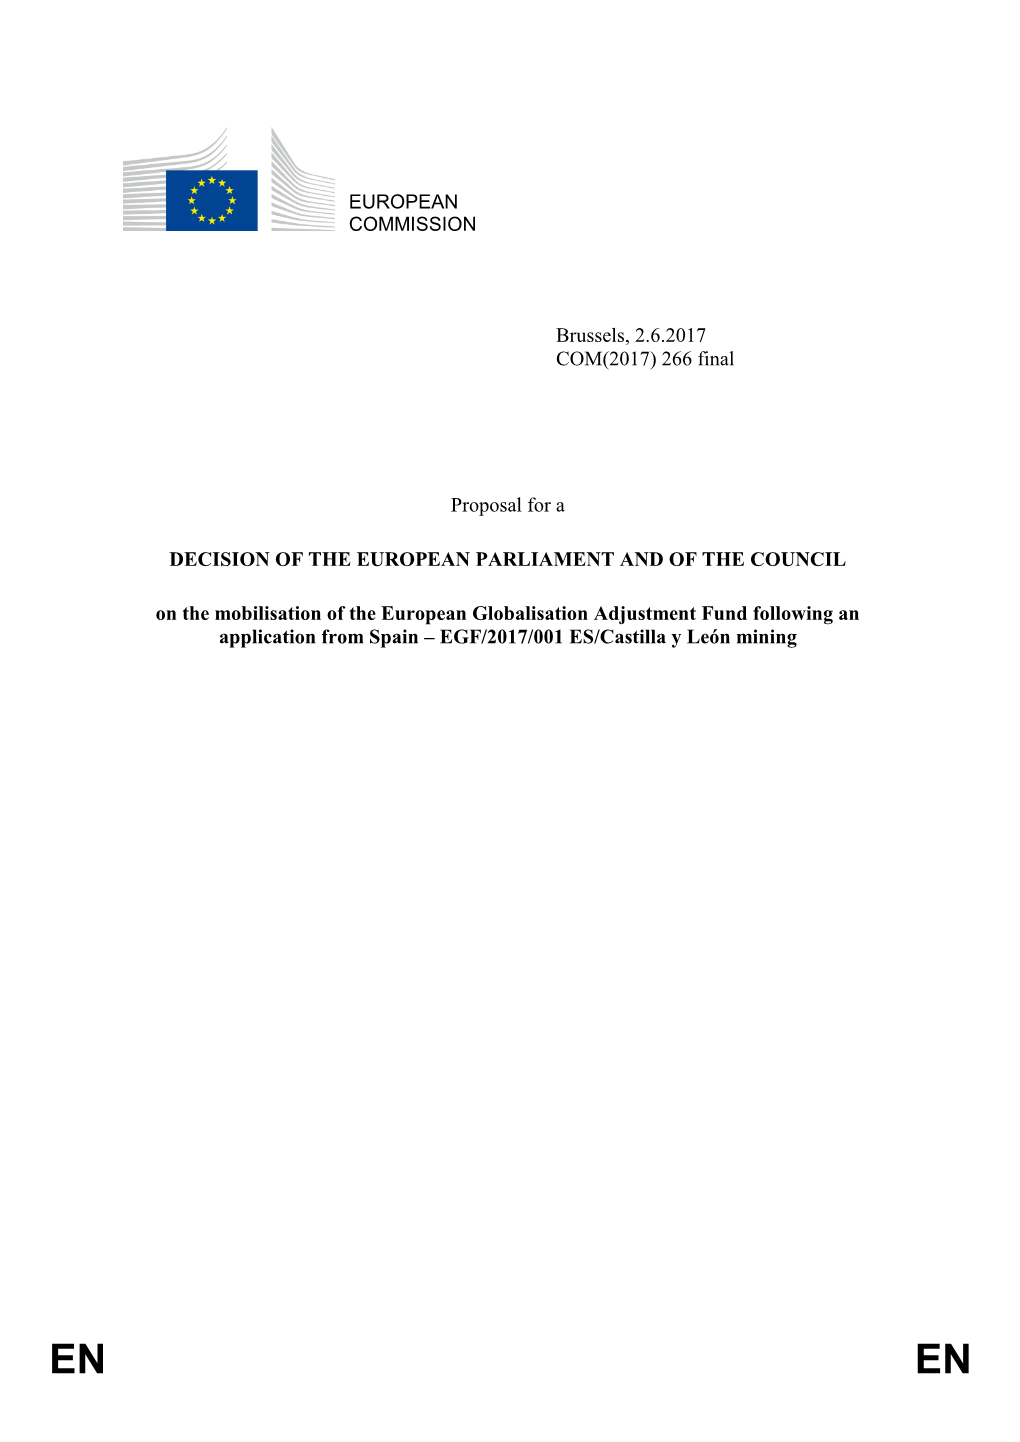 266 Final Proposal for a DECISION of the EUROPEAN PARLIAMENT